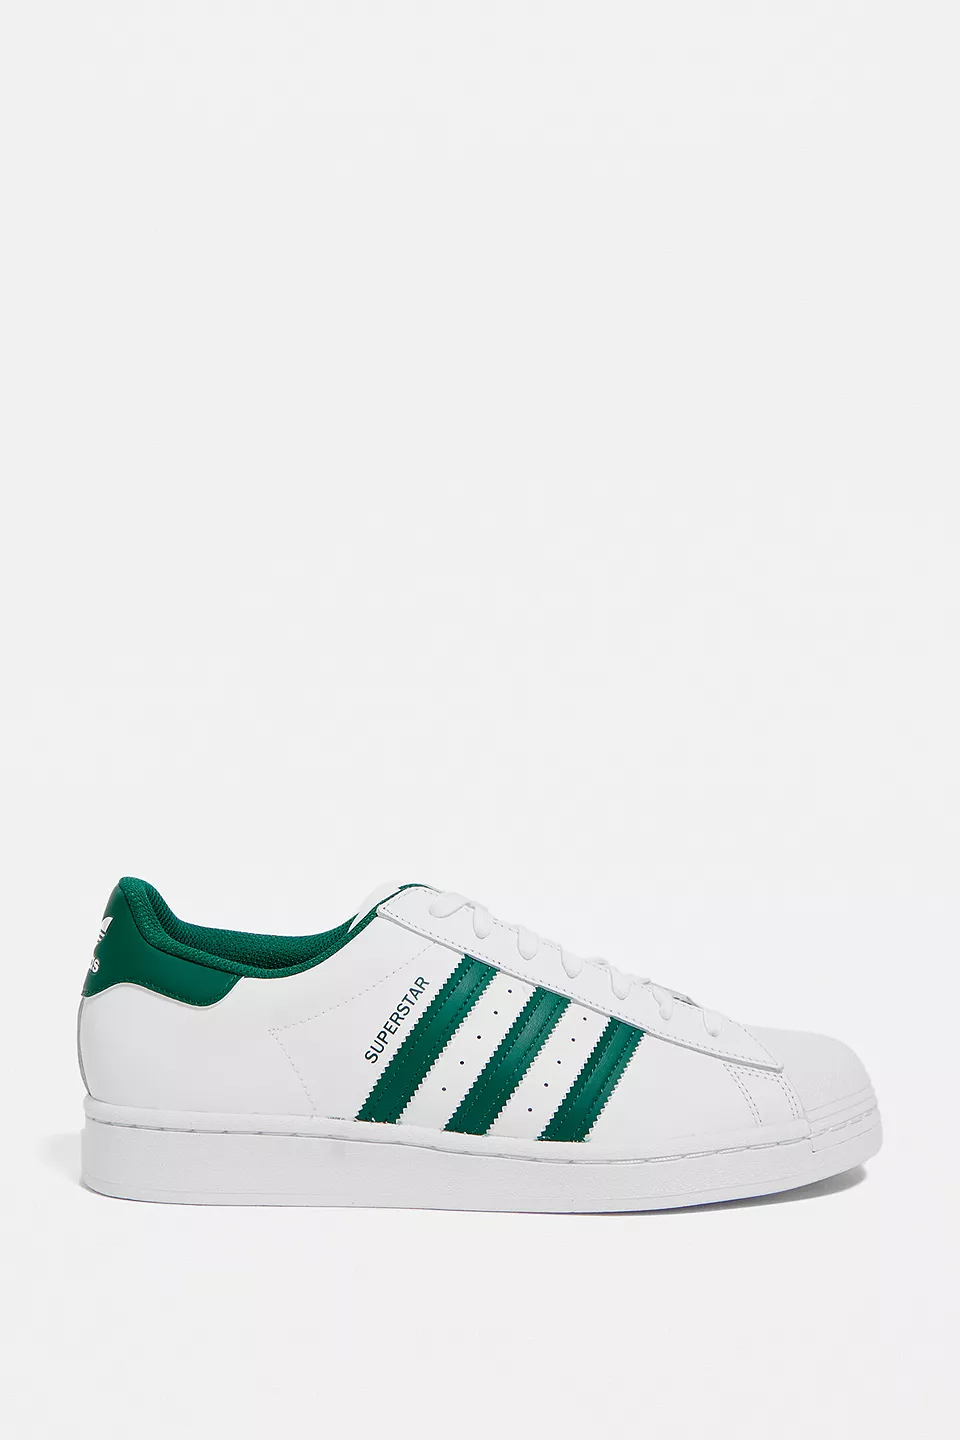 urbanoutfitters.com | adidas White & Green Superstar Trainers